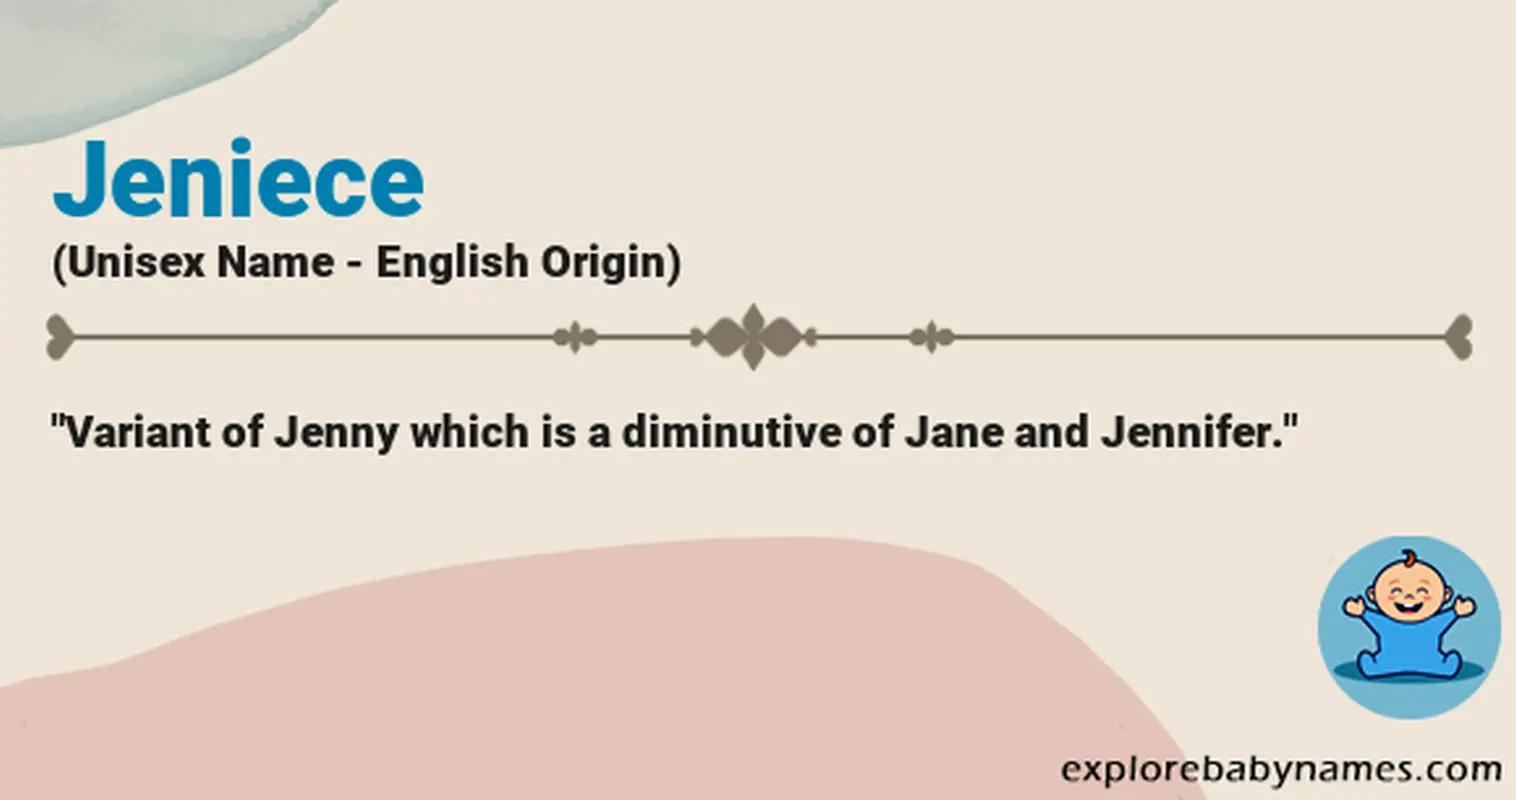 Meaning of Jeniece